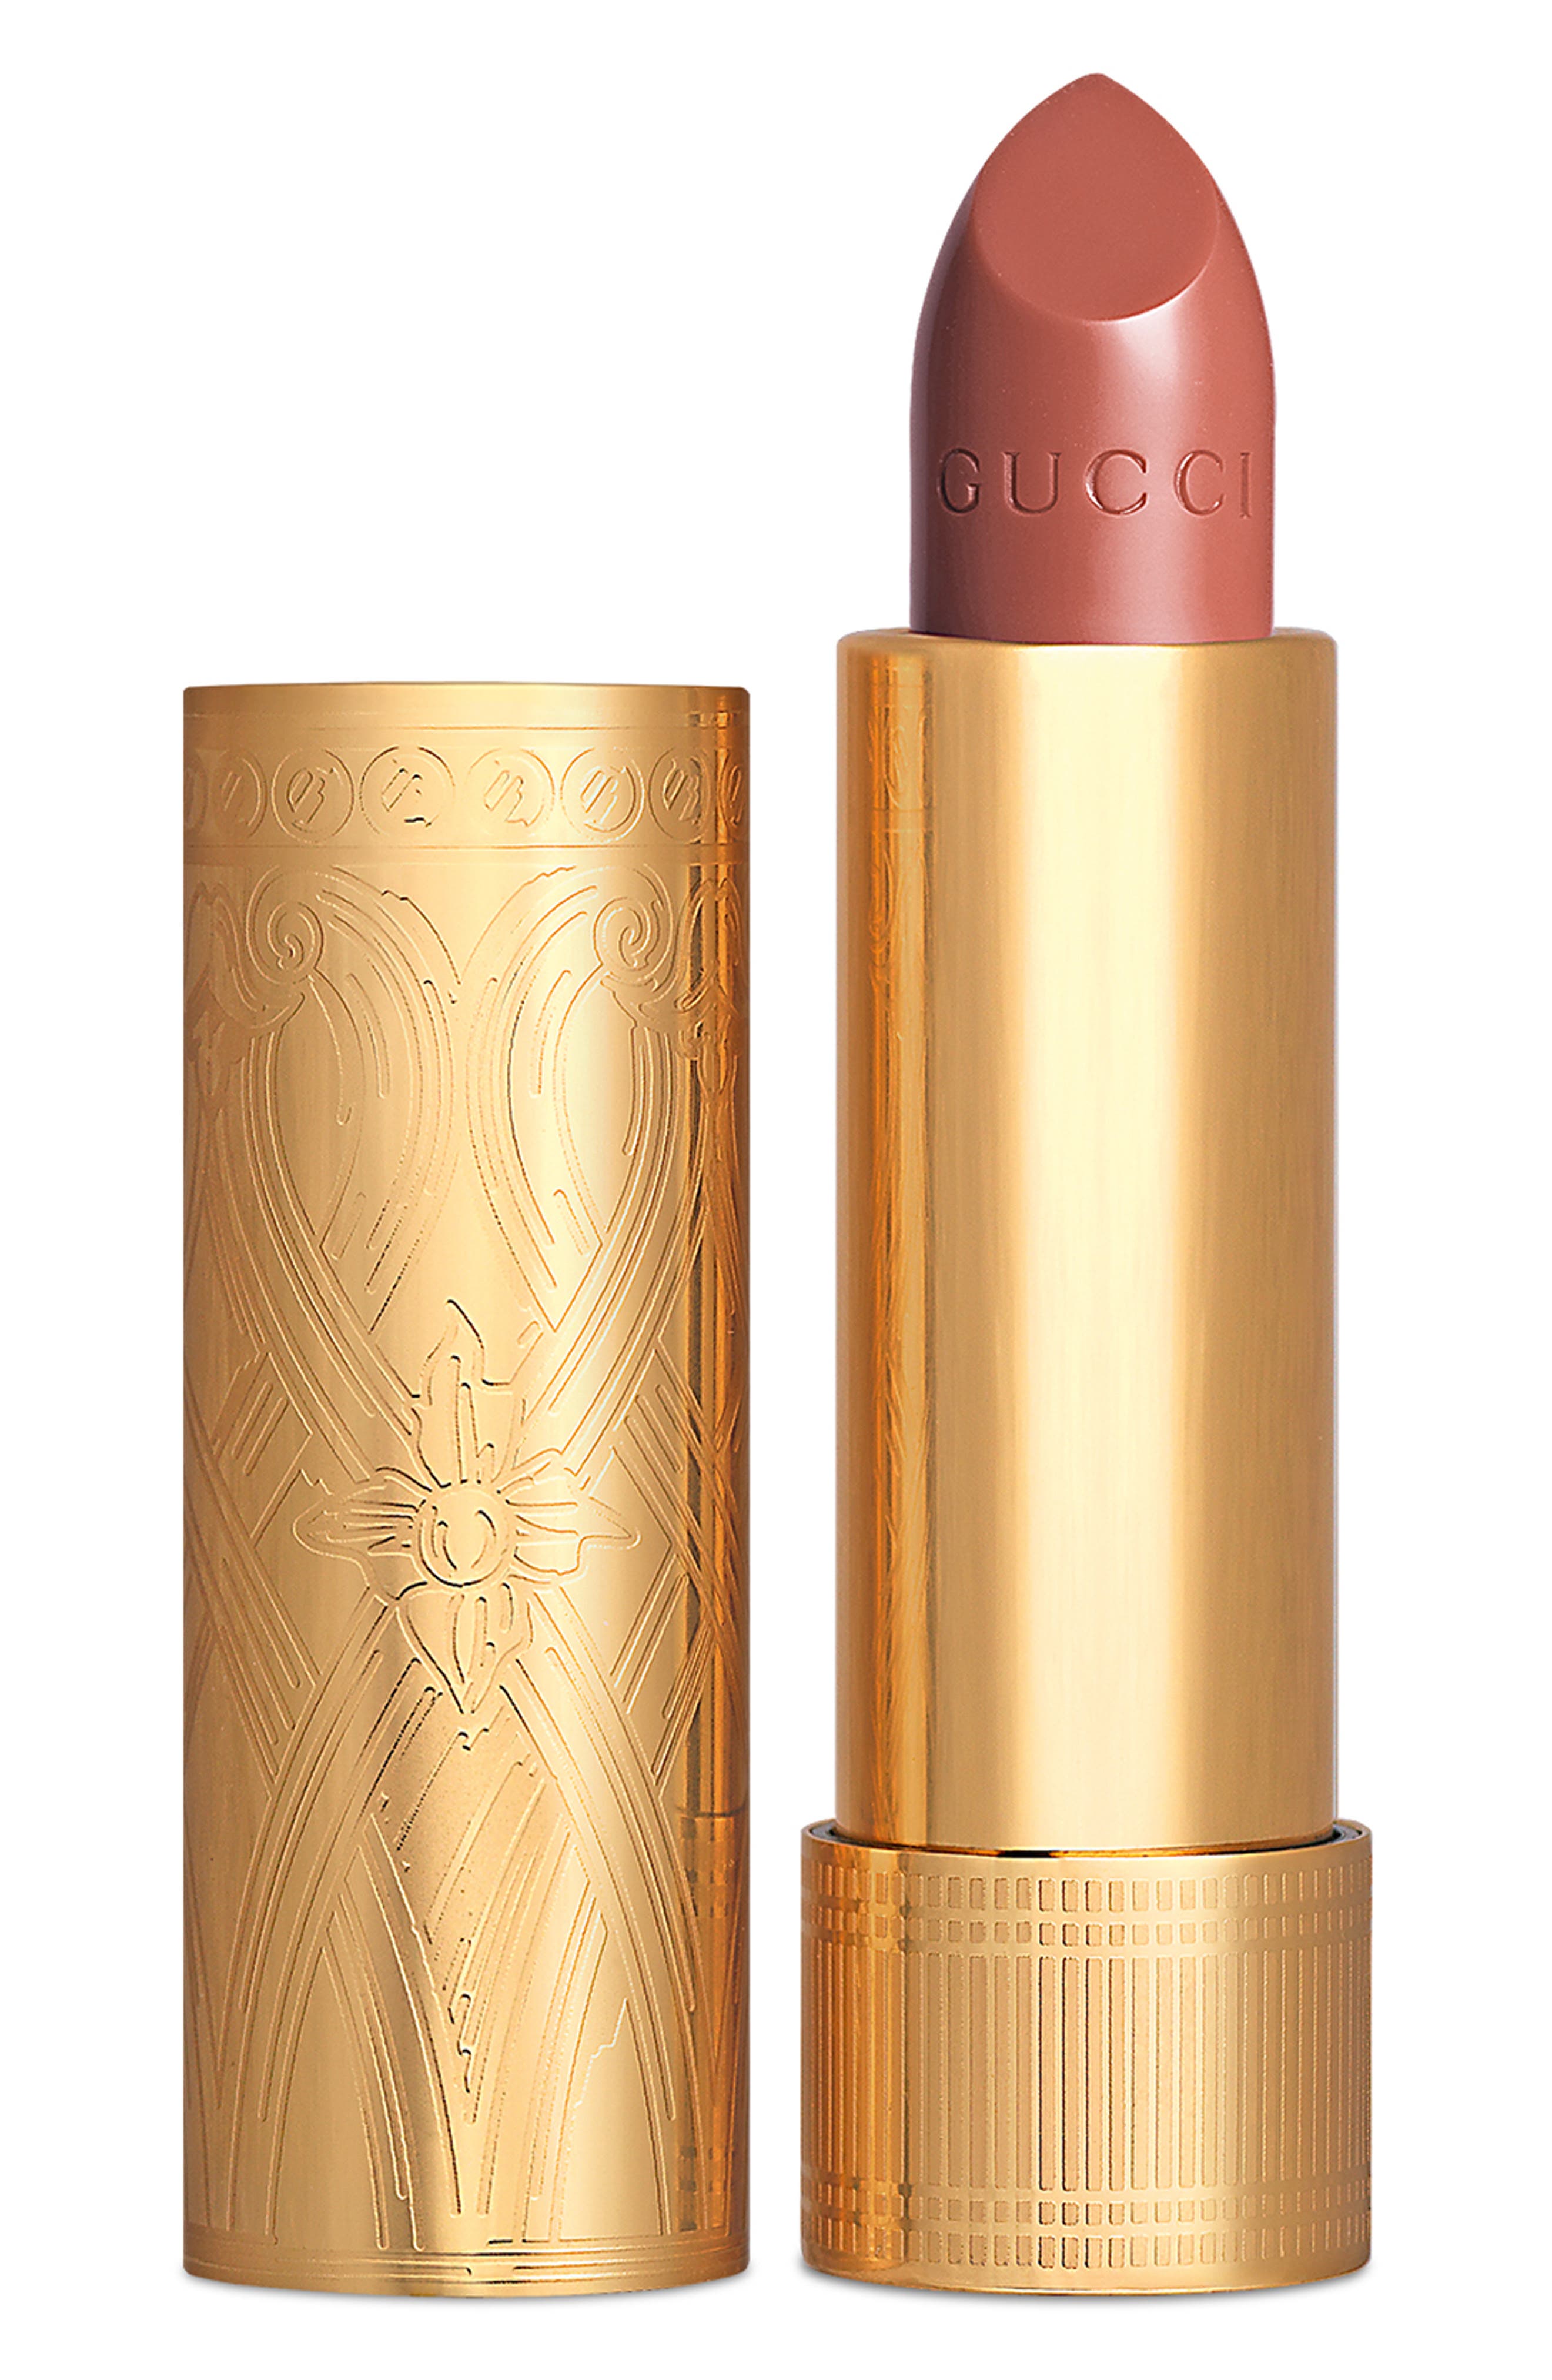 Gucci Rouge a Levres Satin Lipstick in Blaze Of Noon at Nordstrom